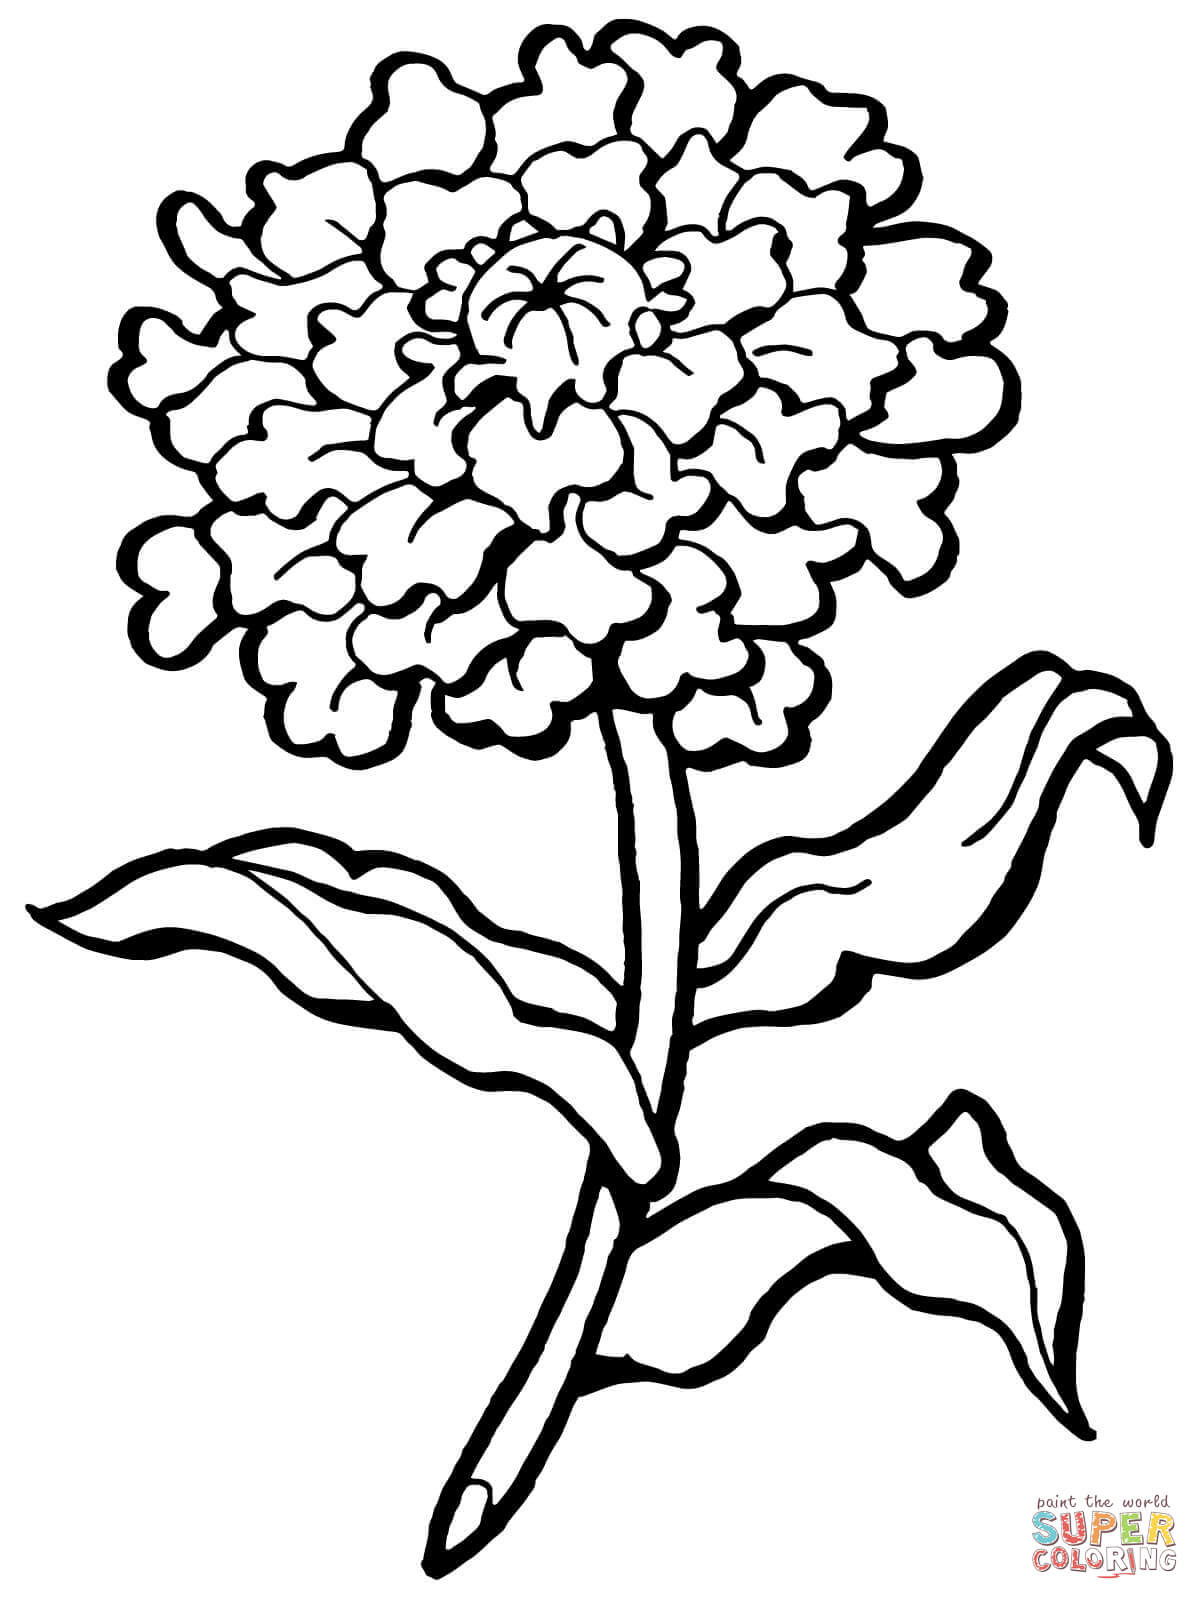 Carnation Line Drawing | Free download on ClipArtMag